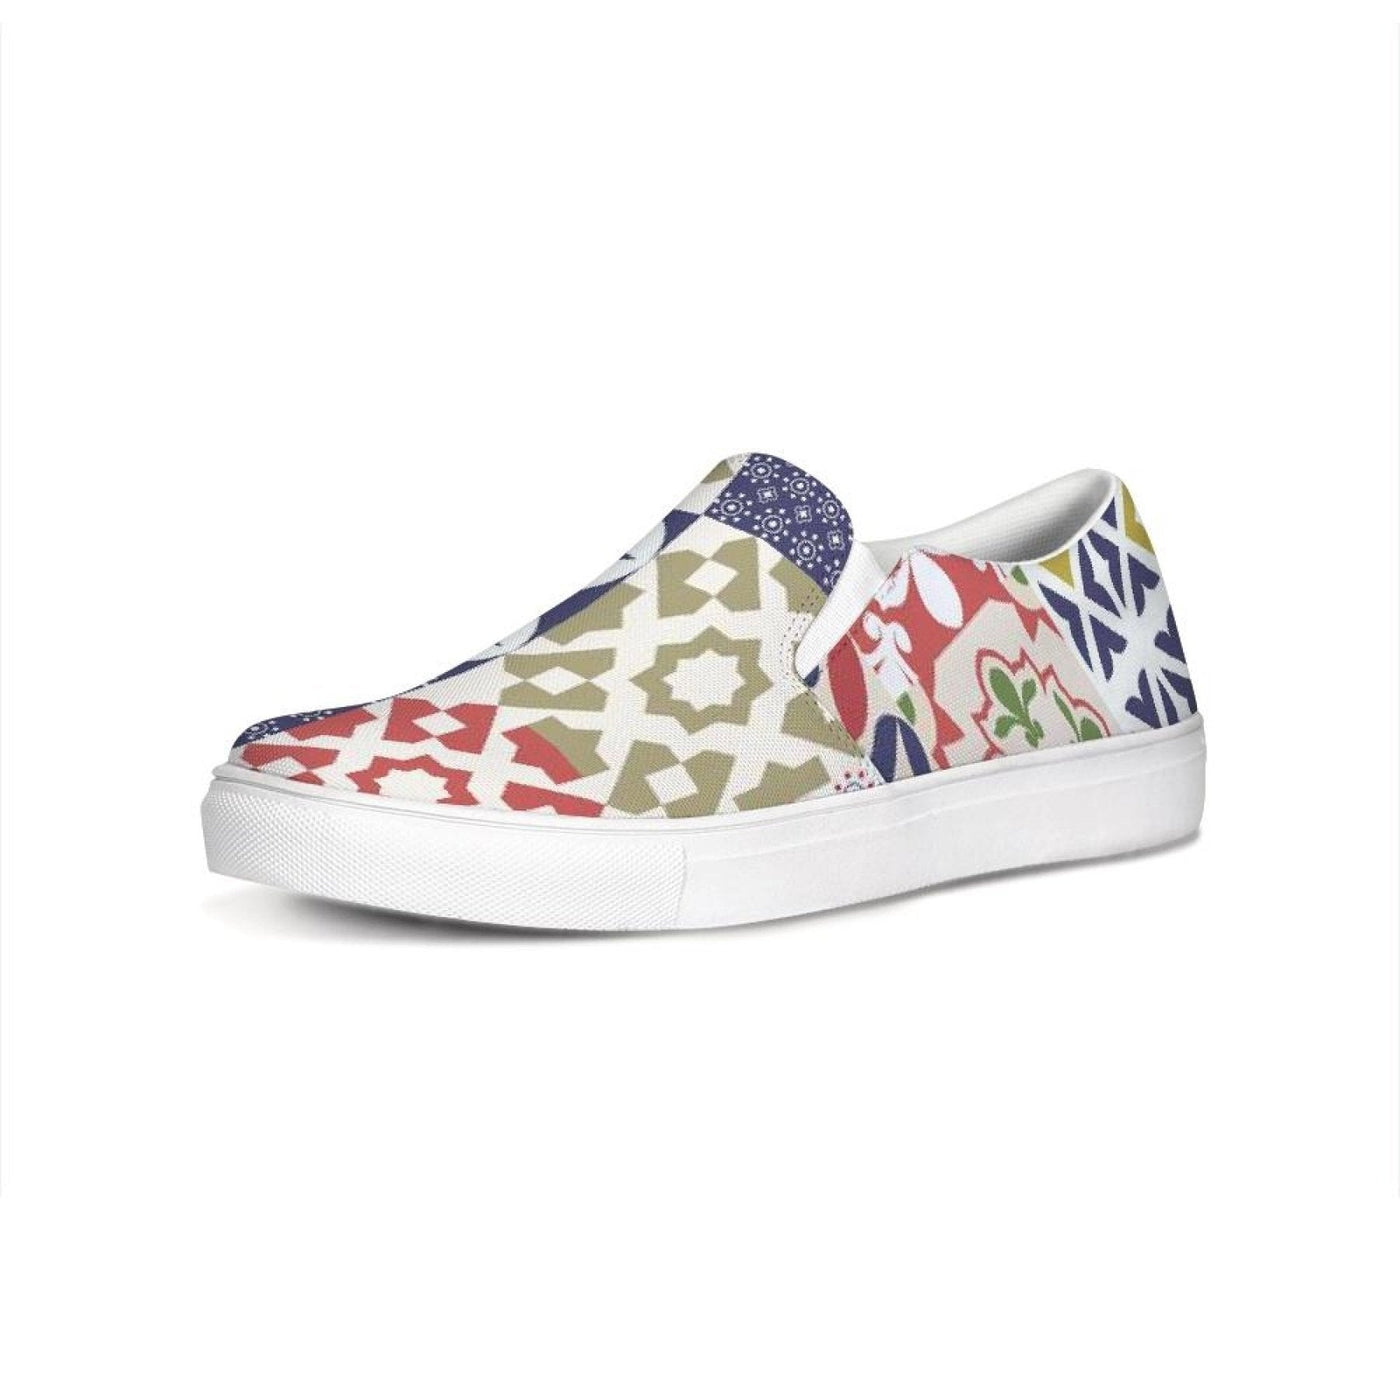 Womens Sneakers Multicolor Patch Style Low Top Slip-on Canvas Shoes - Womens |